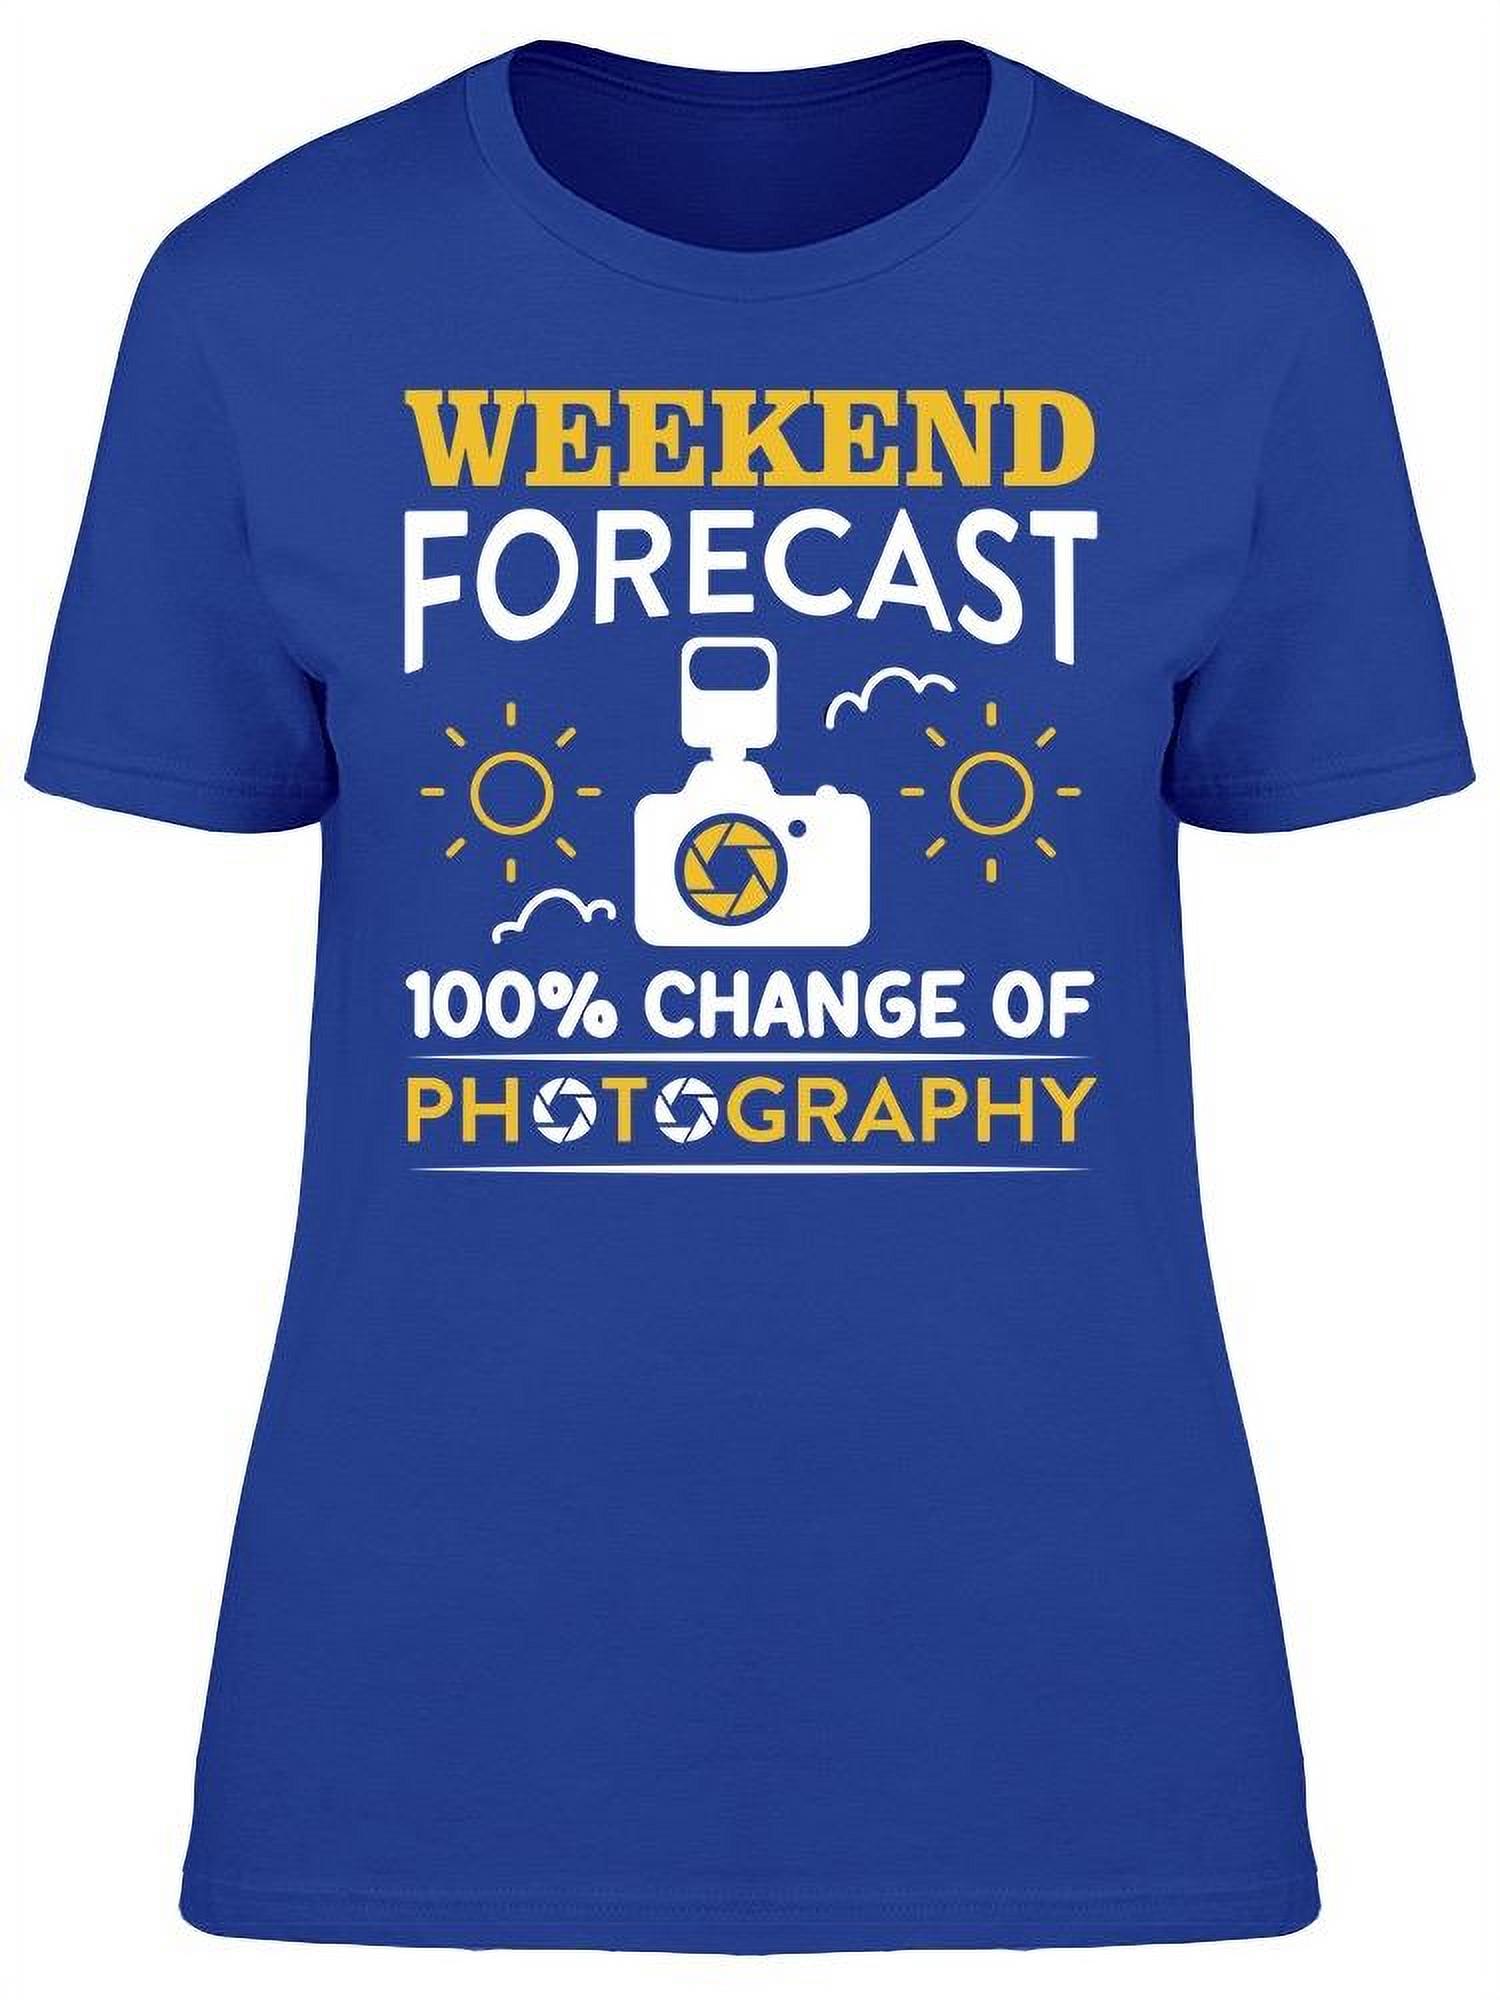 Weekend Forecast T-Shirt Women -Image by Shutterstock, Female x-Large - image 1 of 2